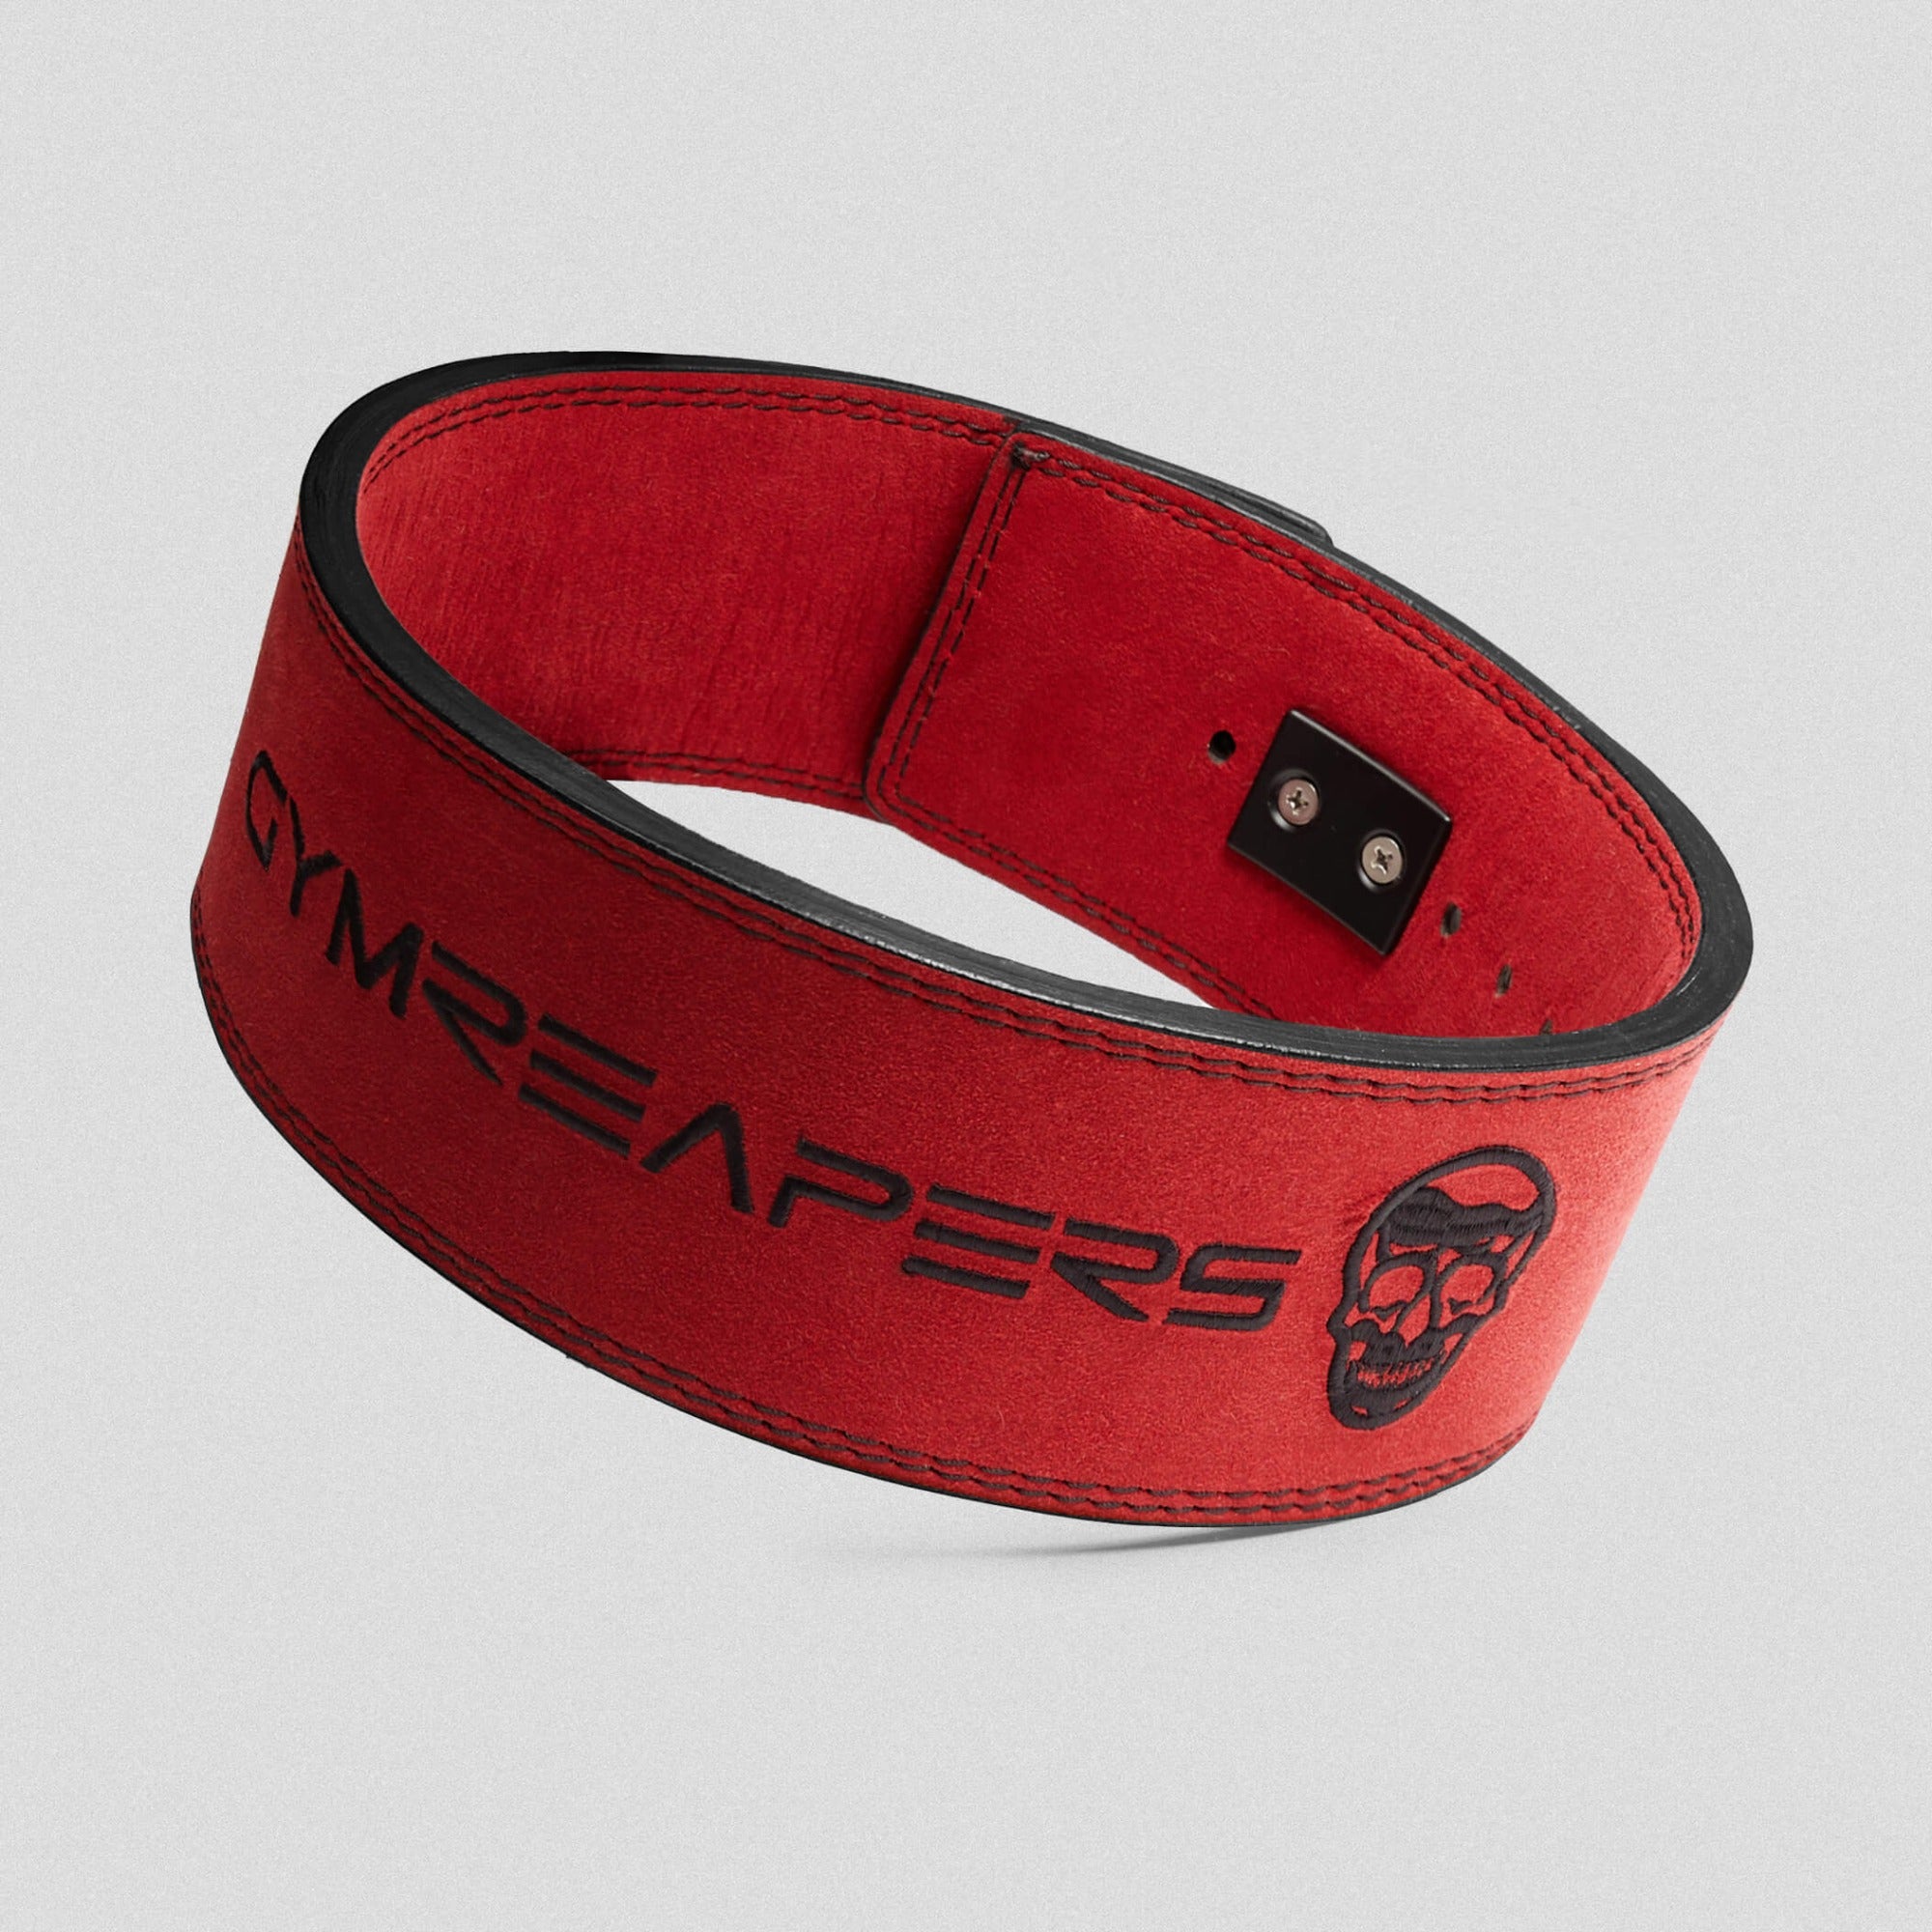 Weightlifting Belts - Gymreapers